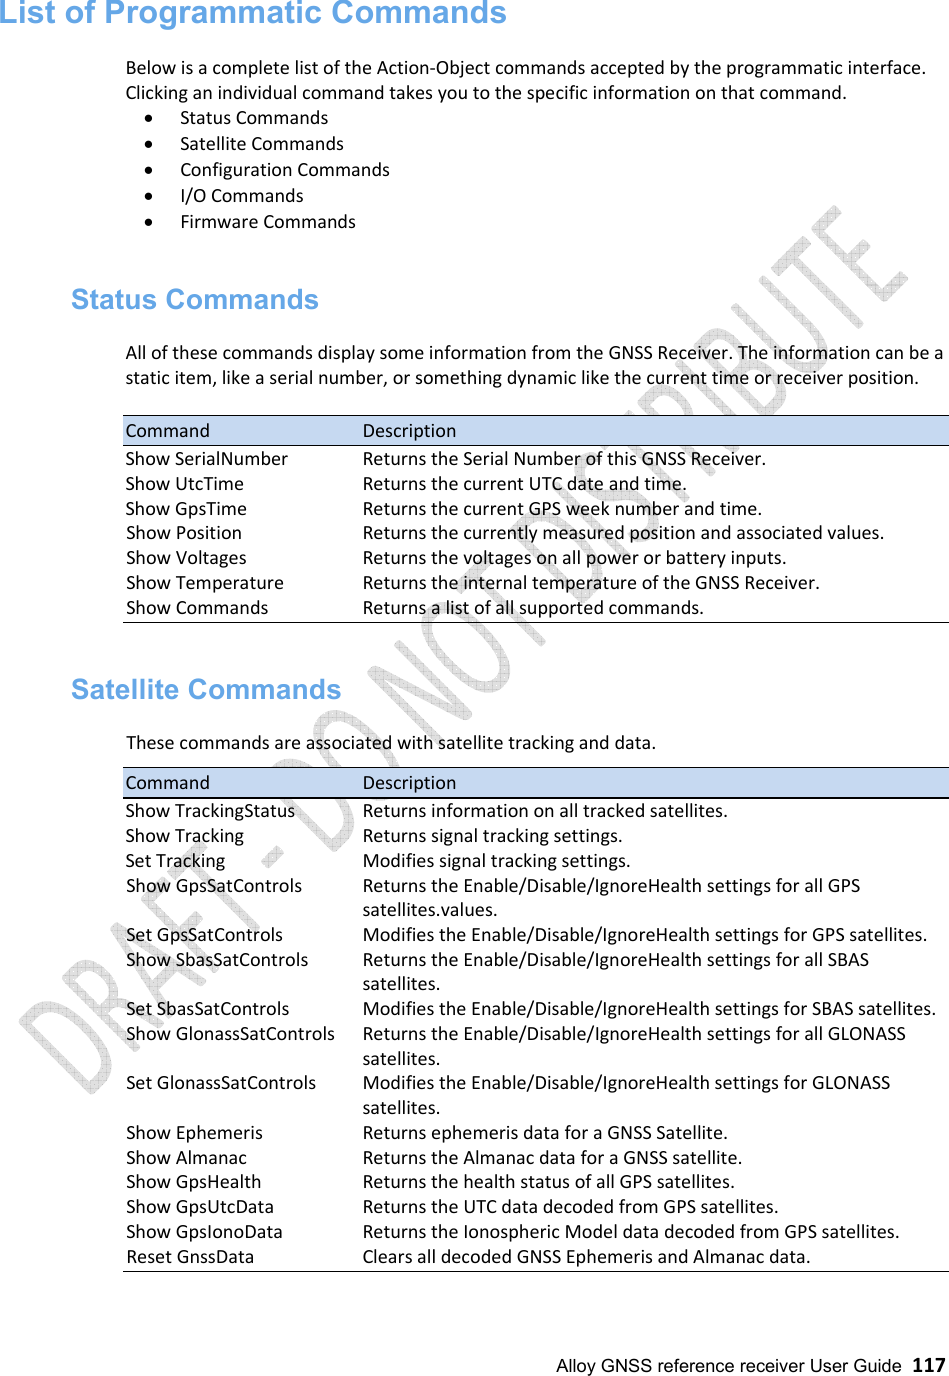  Alloy GNSS reference receiver User Guide  117 List of Programmatic Commands  Below is a complete list of the Action-Object commands accepted by the programmatic interface. Clicking an individual command takes you to the specific information on that command.  • Status Commands  • Satellite Commands  • Configuration Commands  • I/O Commands  • Firmware Commands    Status Commands  All of these commands display some information from the GNSS Receiver. The information can be a static item, like a serial number, or something dynamic like the current time or receiver position.   Command      Description  Show SerialNumber   Returns the Serial Number of this GNSS Receiver. Show UtcTime    Returns the current UTC date and time. Show GpsTime    Returns the current GPS week number and time. Show Position    Returns the currently measured position and associated values. Show Voltages    Returns the voltages on all power or battery inputs. Show Temperature   Returns the internal temperature of the GNSS Receiver. Show Commands    Returns a list of all supported commands.   Satellite Commands  These commands are associated with satellite tracking and data.  Command      Description  Show TrackingStatus  Returns information on all tracked satellites. Show Tracking    Returns signal tracking settings. Set Tracking    Modifies signal tracking settings. Show GpsSatControls  Returns the Enable/Disable/IgnoreHealth settings for all GPS satellites.values. Set GpsSatControls  Modifies the Enable/Disable/IgnoreHealth settings for GPS satellites. Show SbasSatControls  Returns the Enable/Disable/IgnoreHealth settings for all SBAS satellites. Set SbasSatControls  Modifies the Enable/Disable/IgnoreHealth settings for SBAS satellites. Show GlonassSatControls  Returns the Enable/Disable/IgnoreHealth settings for all GLONASS satellites. Set GlonassSatControls  Modifies the Enable/Disable/IgnoreHealth settings for GLONASS satellites. Show Ephemeris  Returns ephemeris data for a GNSS Satellite. Show Almanac  Returns the Almanac data for a GNSS satellite. Show GpsHealth  Returns the health status of all GPS satellites. Show GpsUtcData  Returns the UTC data decoded from GPS satellites. Show GpsIonoData  Returns the Ionospheric Model data decoded from GPS satellites. Reset GnssData  Clears all decoded GNSS Ephemeris and Almanac data.  